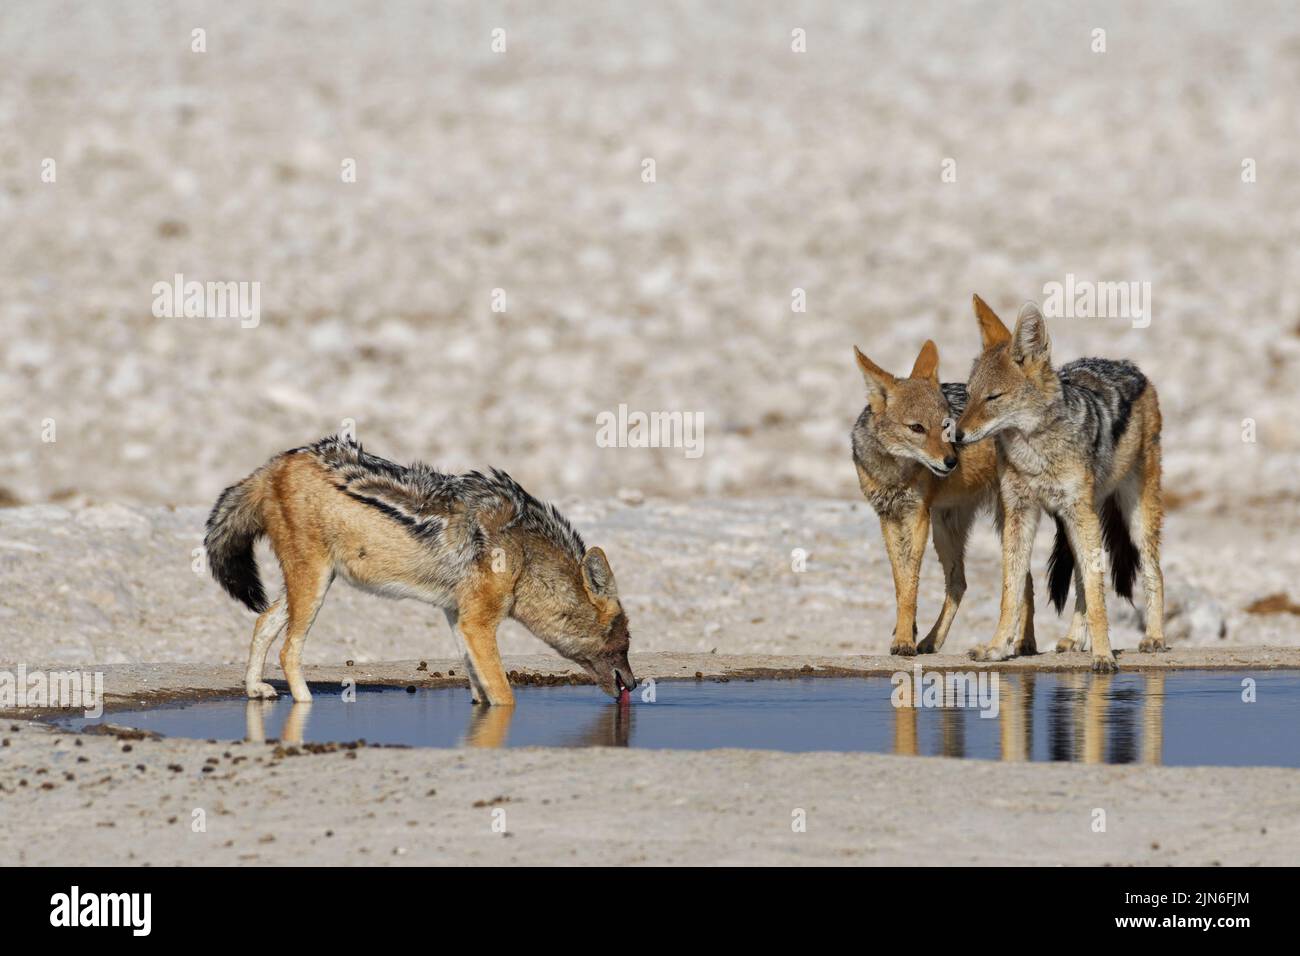 Black-backed jackals (Canis mesomelas), three adults at waterhole, one in water drinking, Etosha National Park, Namibia, Africa Stock Photo